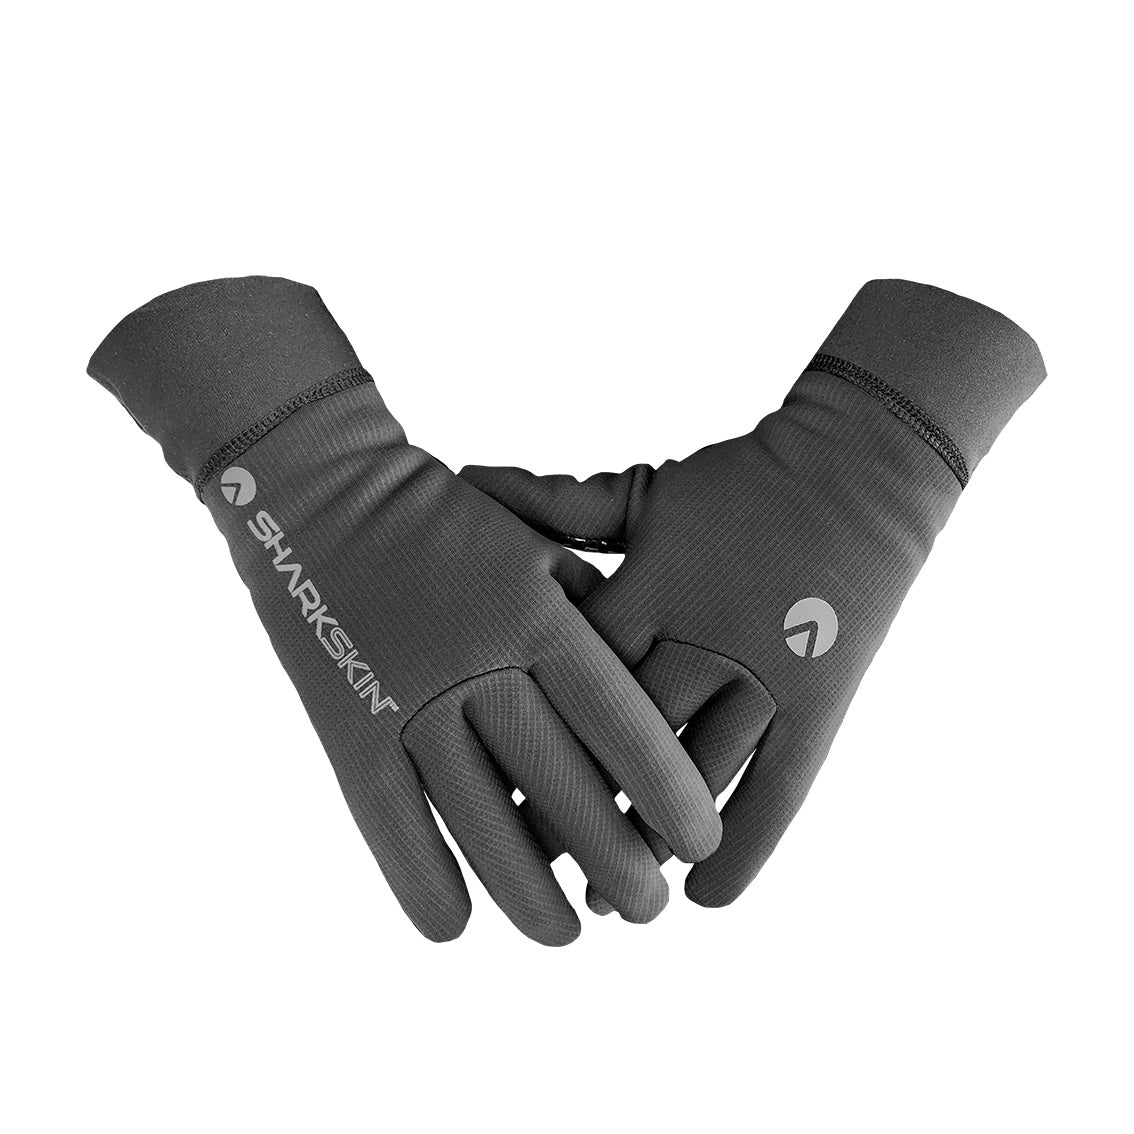 T2 CHILLPROOF GLOVE